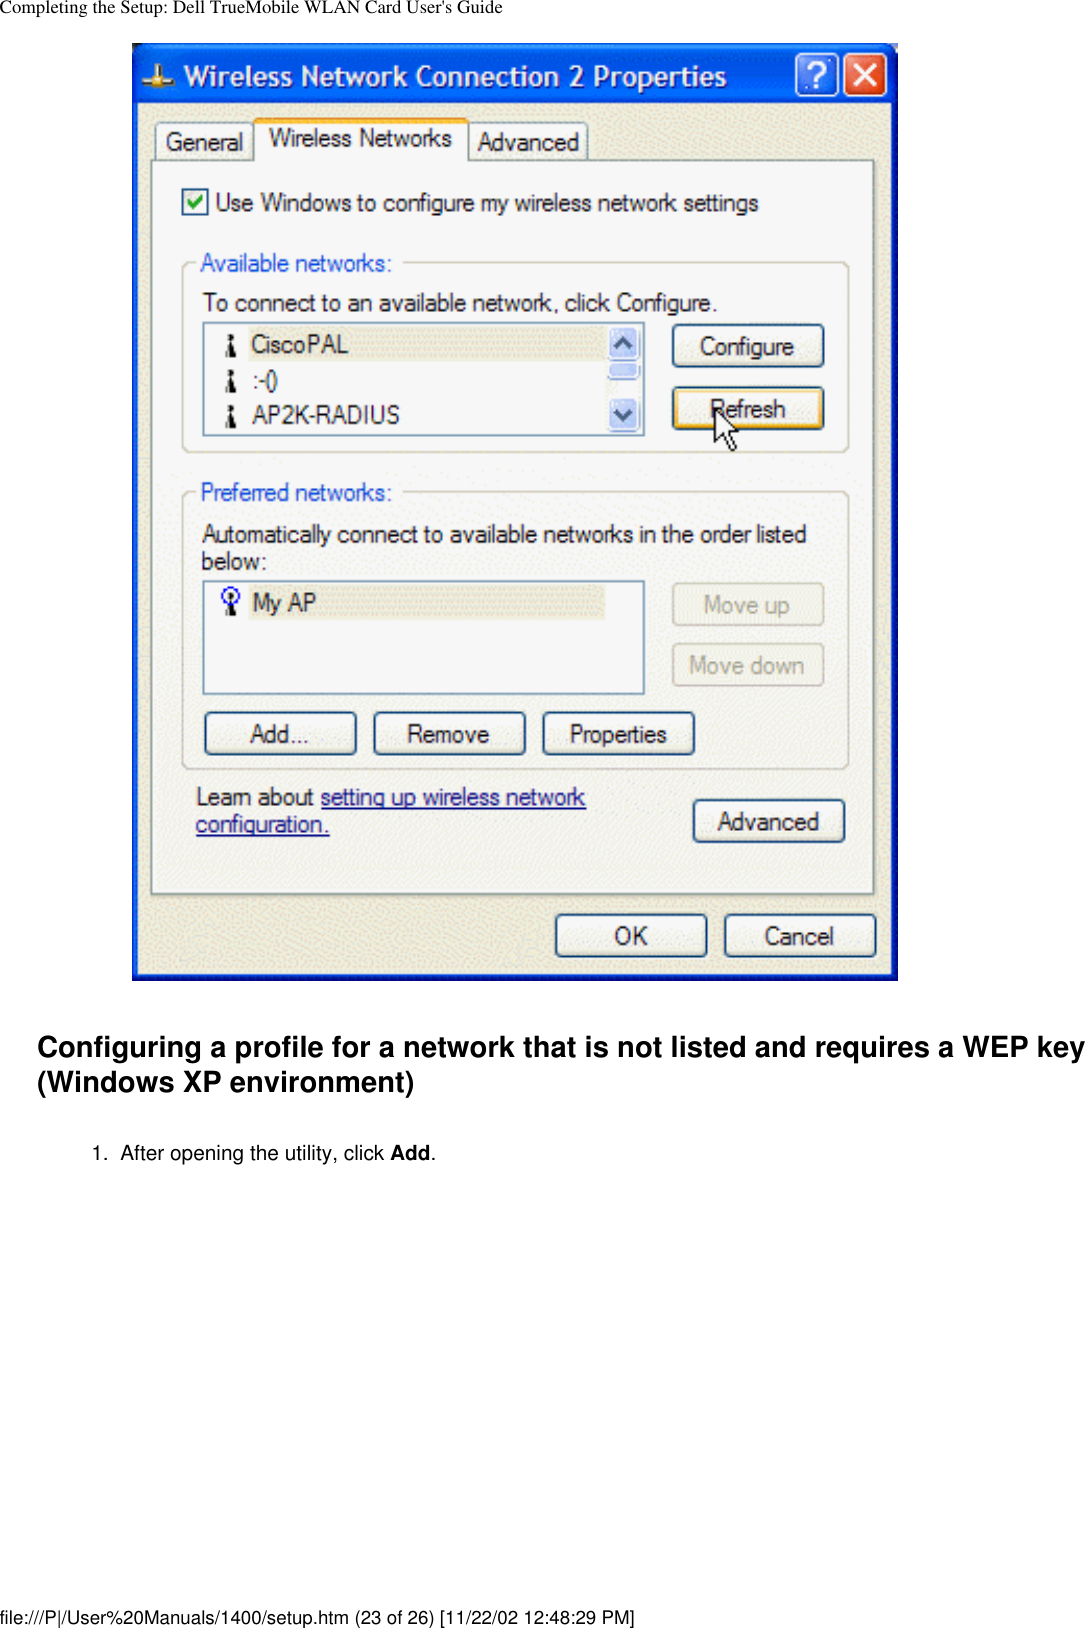 Completing the Setup: Dell TrueMobile WLAN Card User&apos;s GuideConfiguring a profile for a network that is not listed and requires a WEP key (Windows XP environment)1.  After opening the utility, click Add. file:///P|/User%20Manuals/1400/setup.htm (23 of 26) [11/22/02 12:48:29 PM]